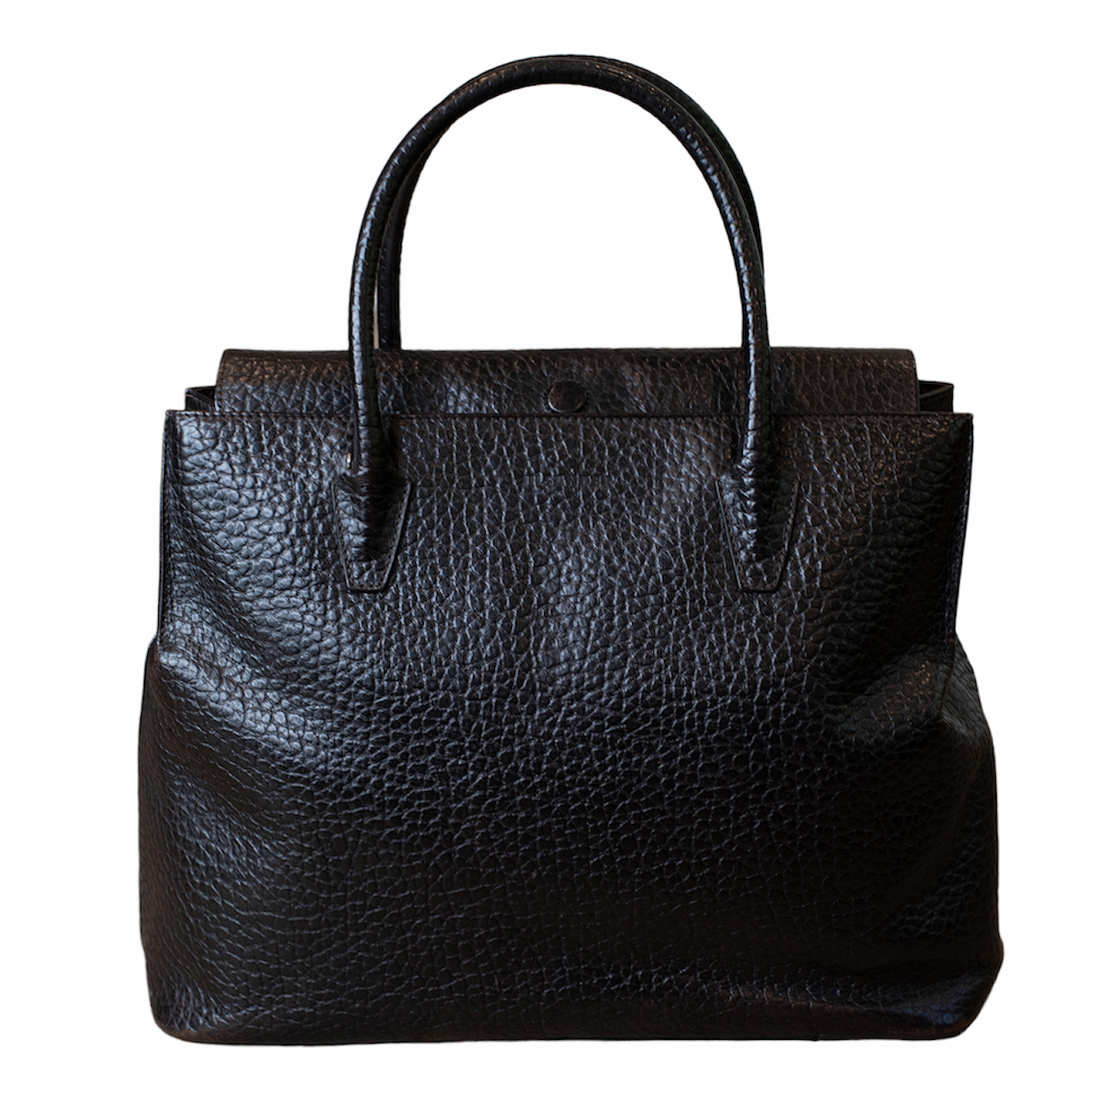 Jil Sander Classic handbag in grained leather with magnetic closure